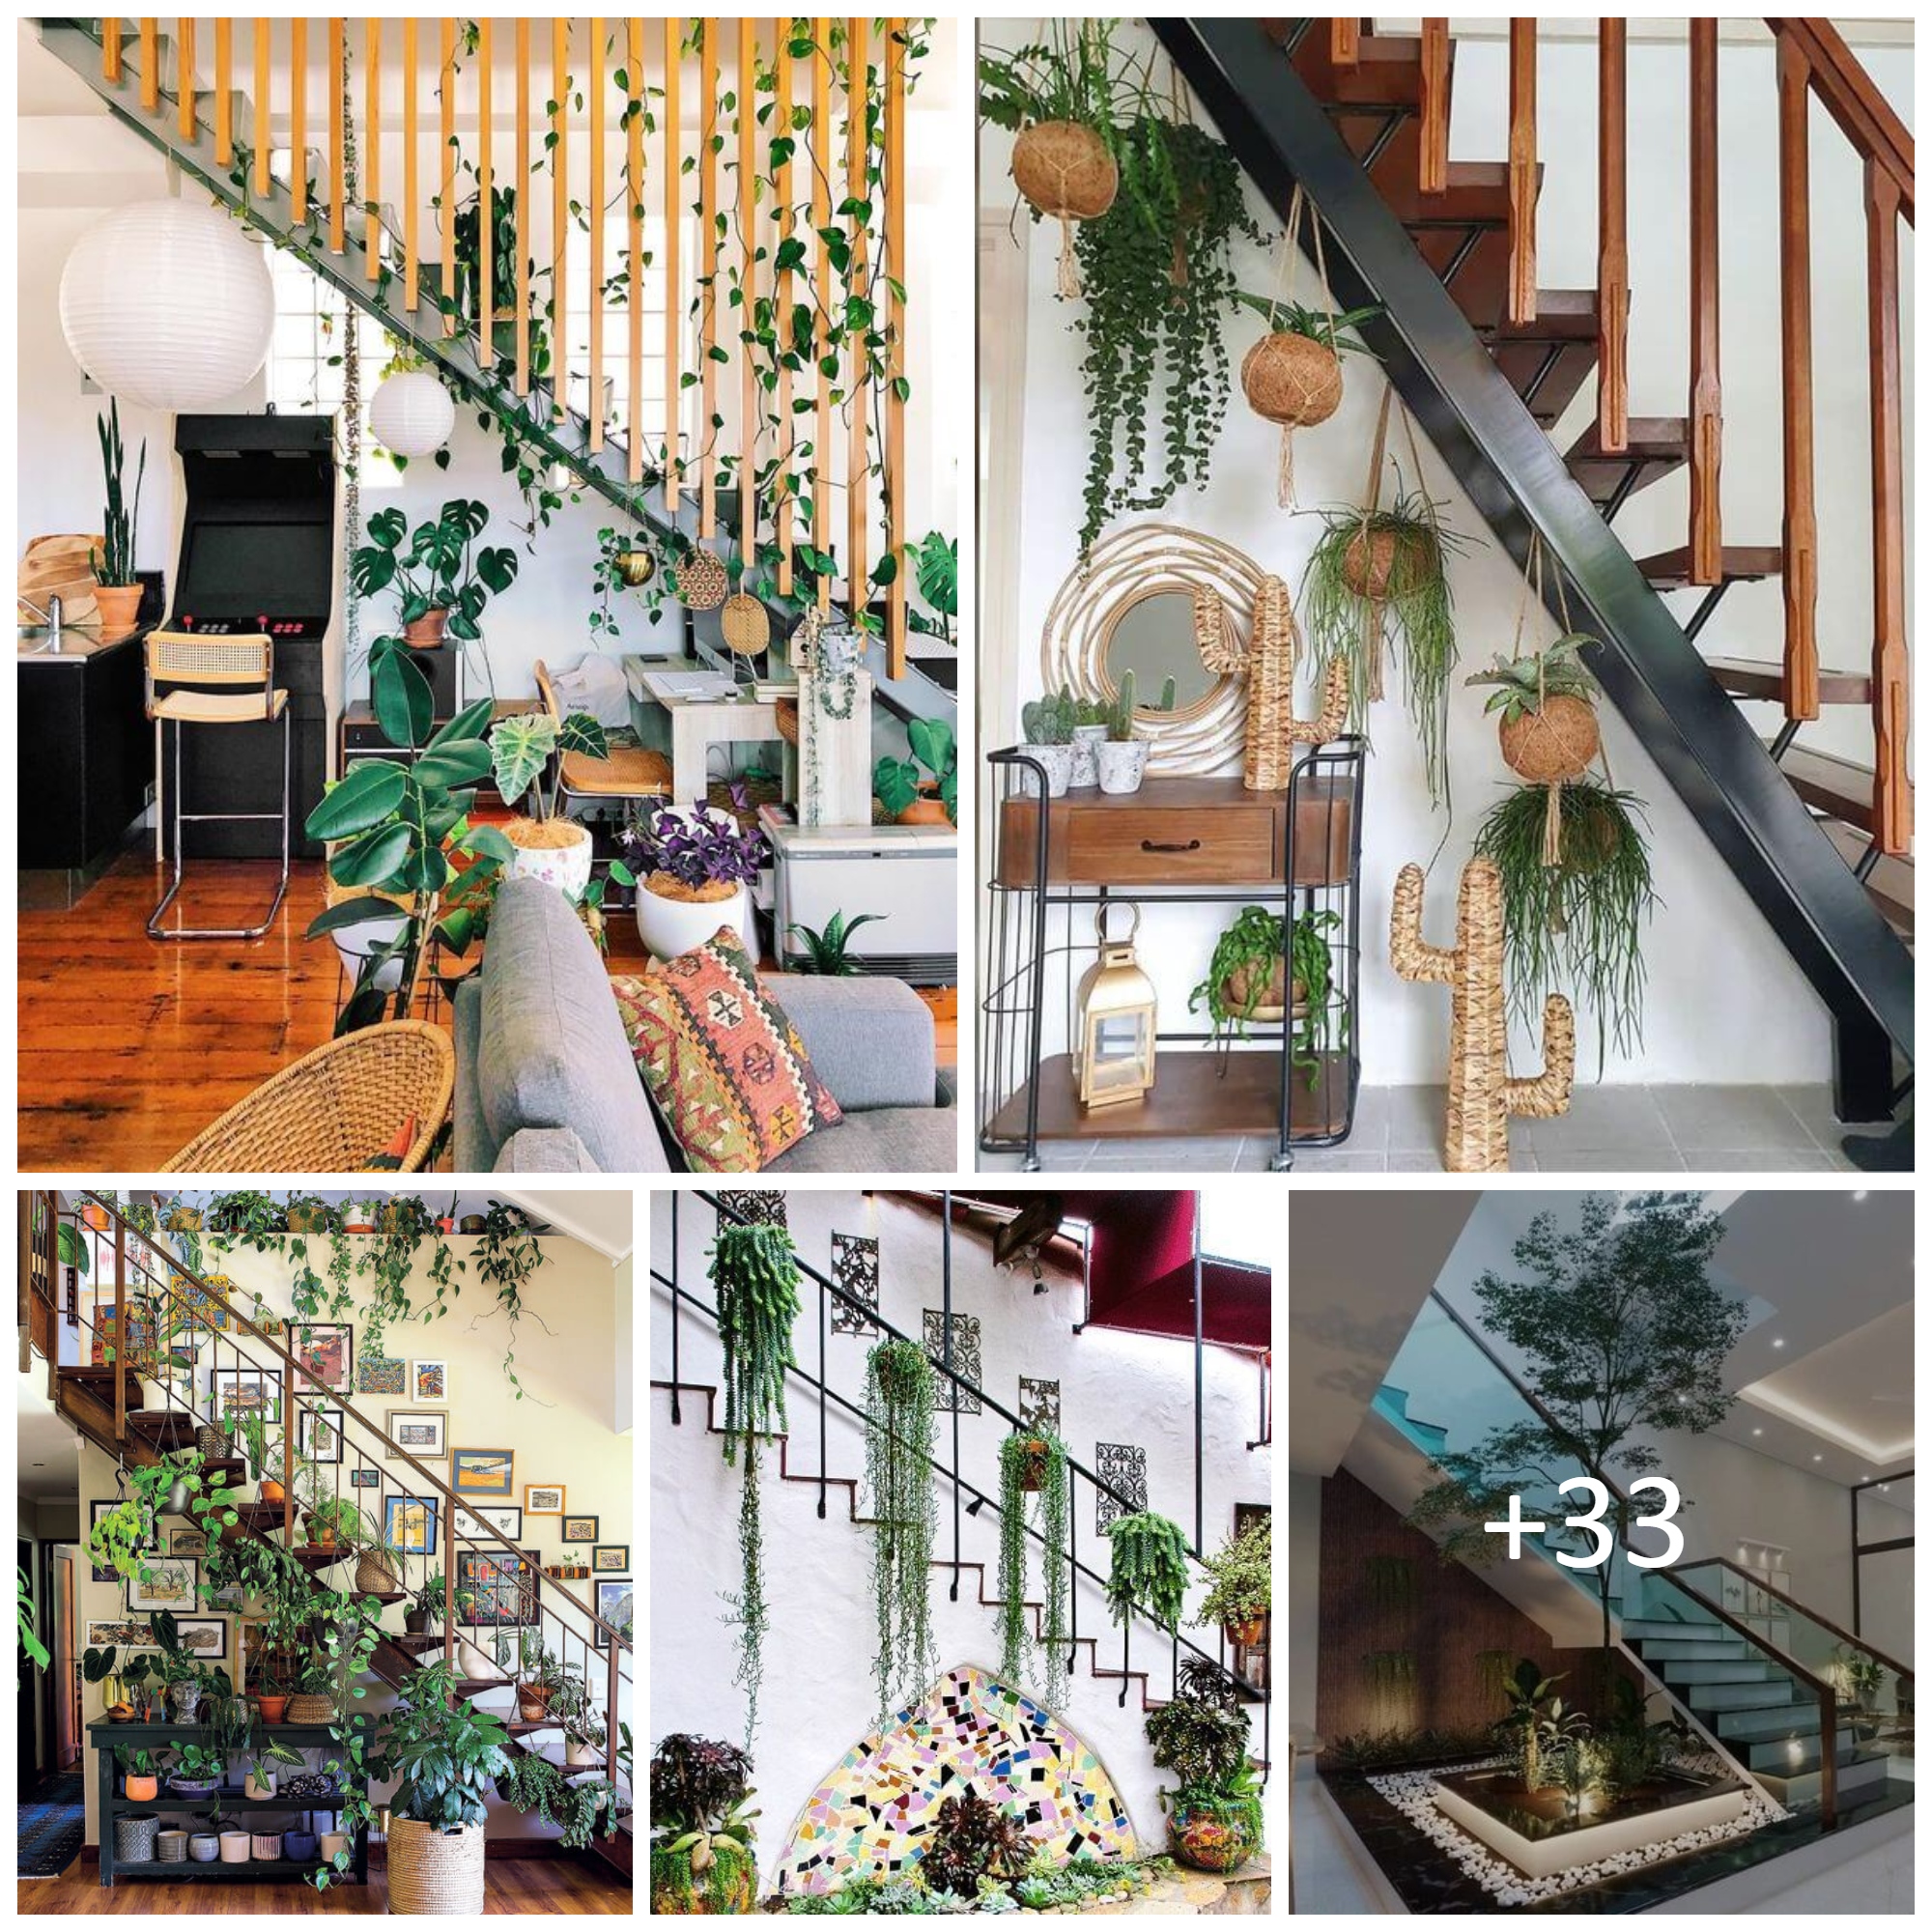 Inventive Ideas for That Space Under the Stairs